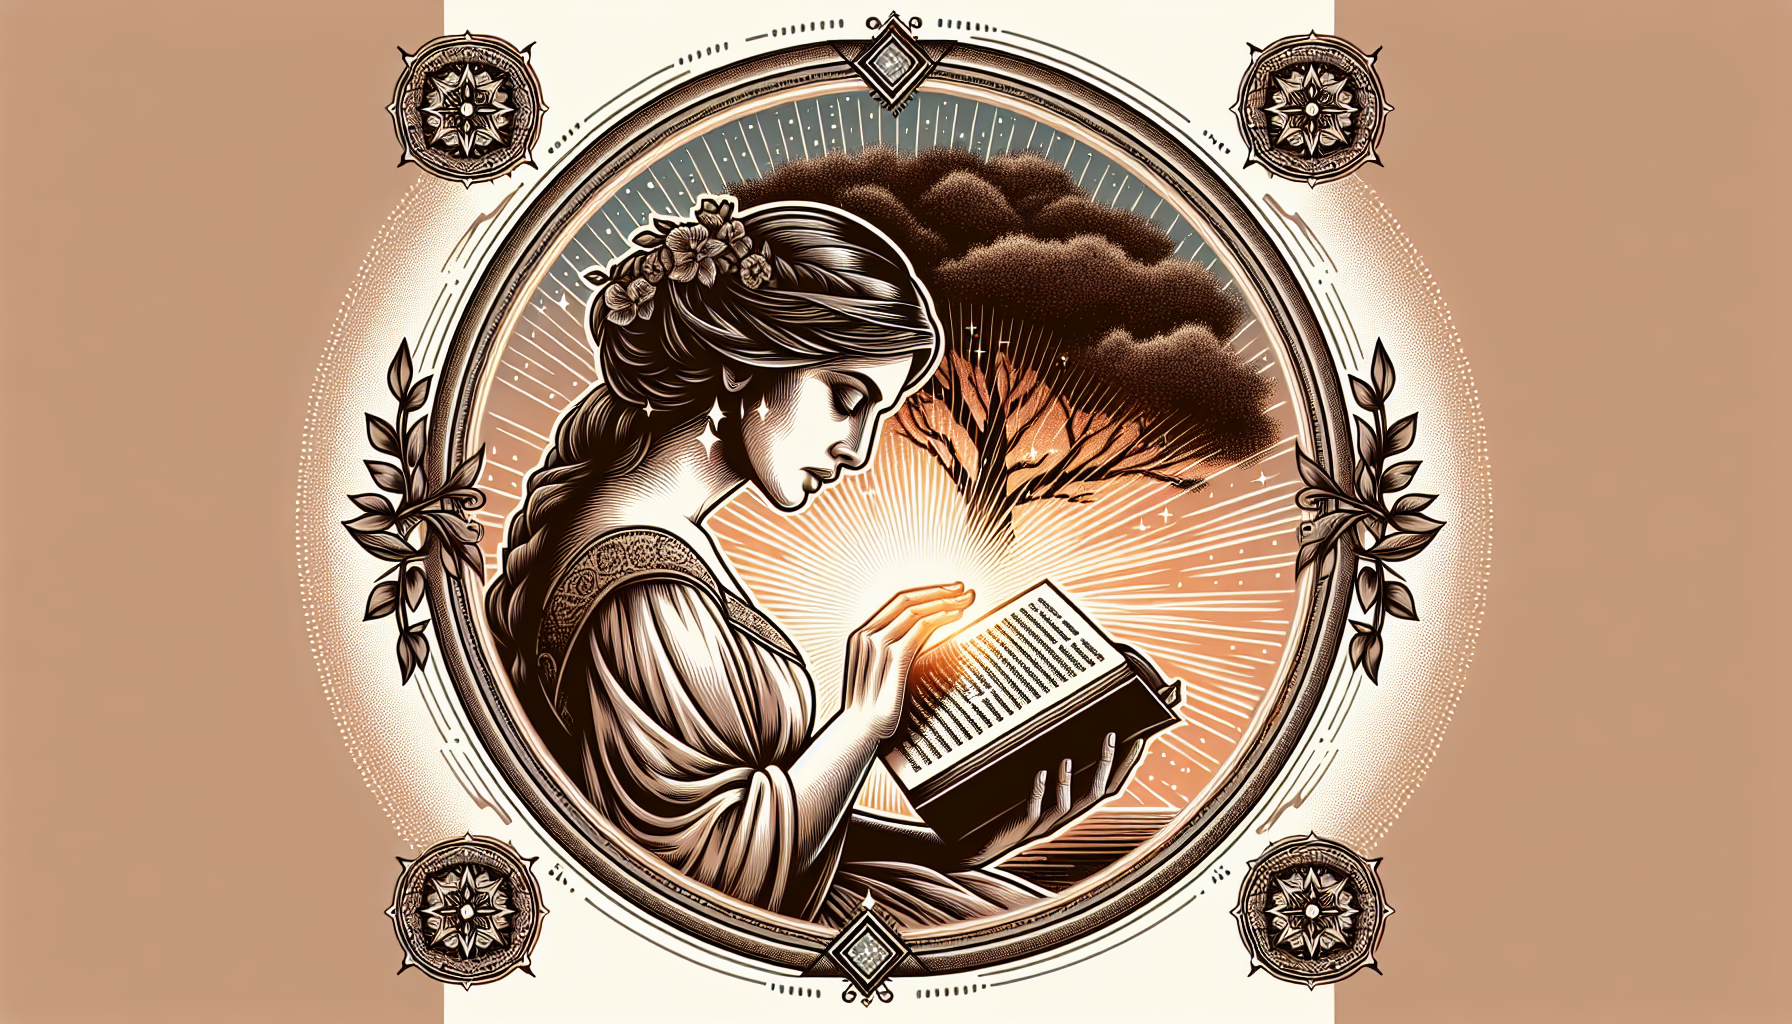 An elegant illustration of a wise woman from Proverbs 31:30, depicted as sitting under a serene, ancient tree, flipping through a glowing book with visible phrases in it, surrounded by symbols represe